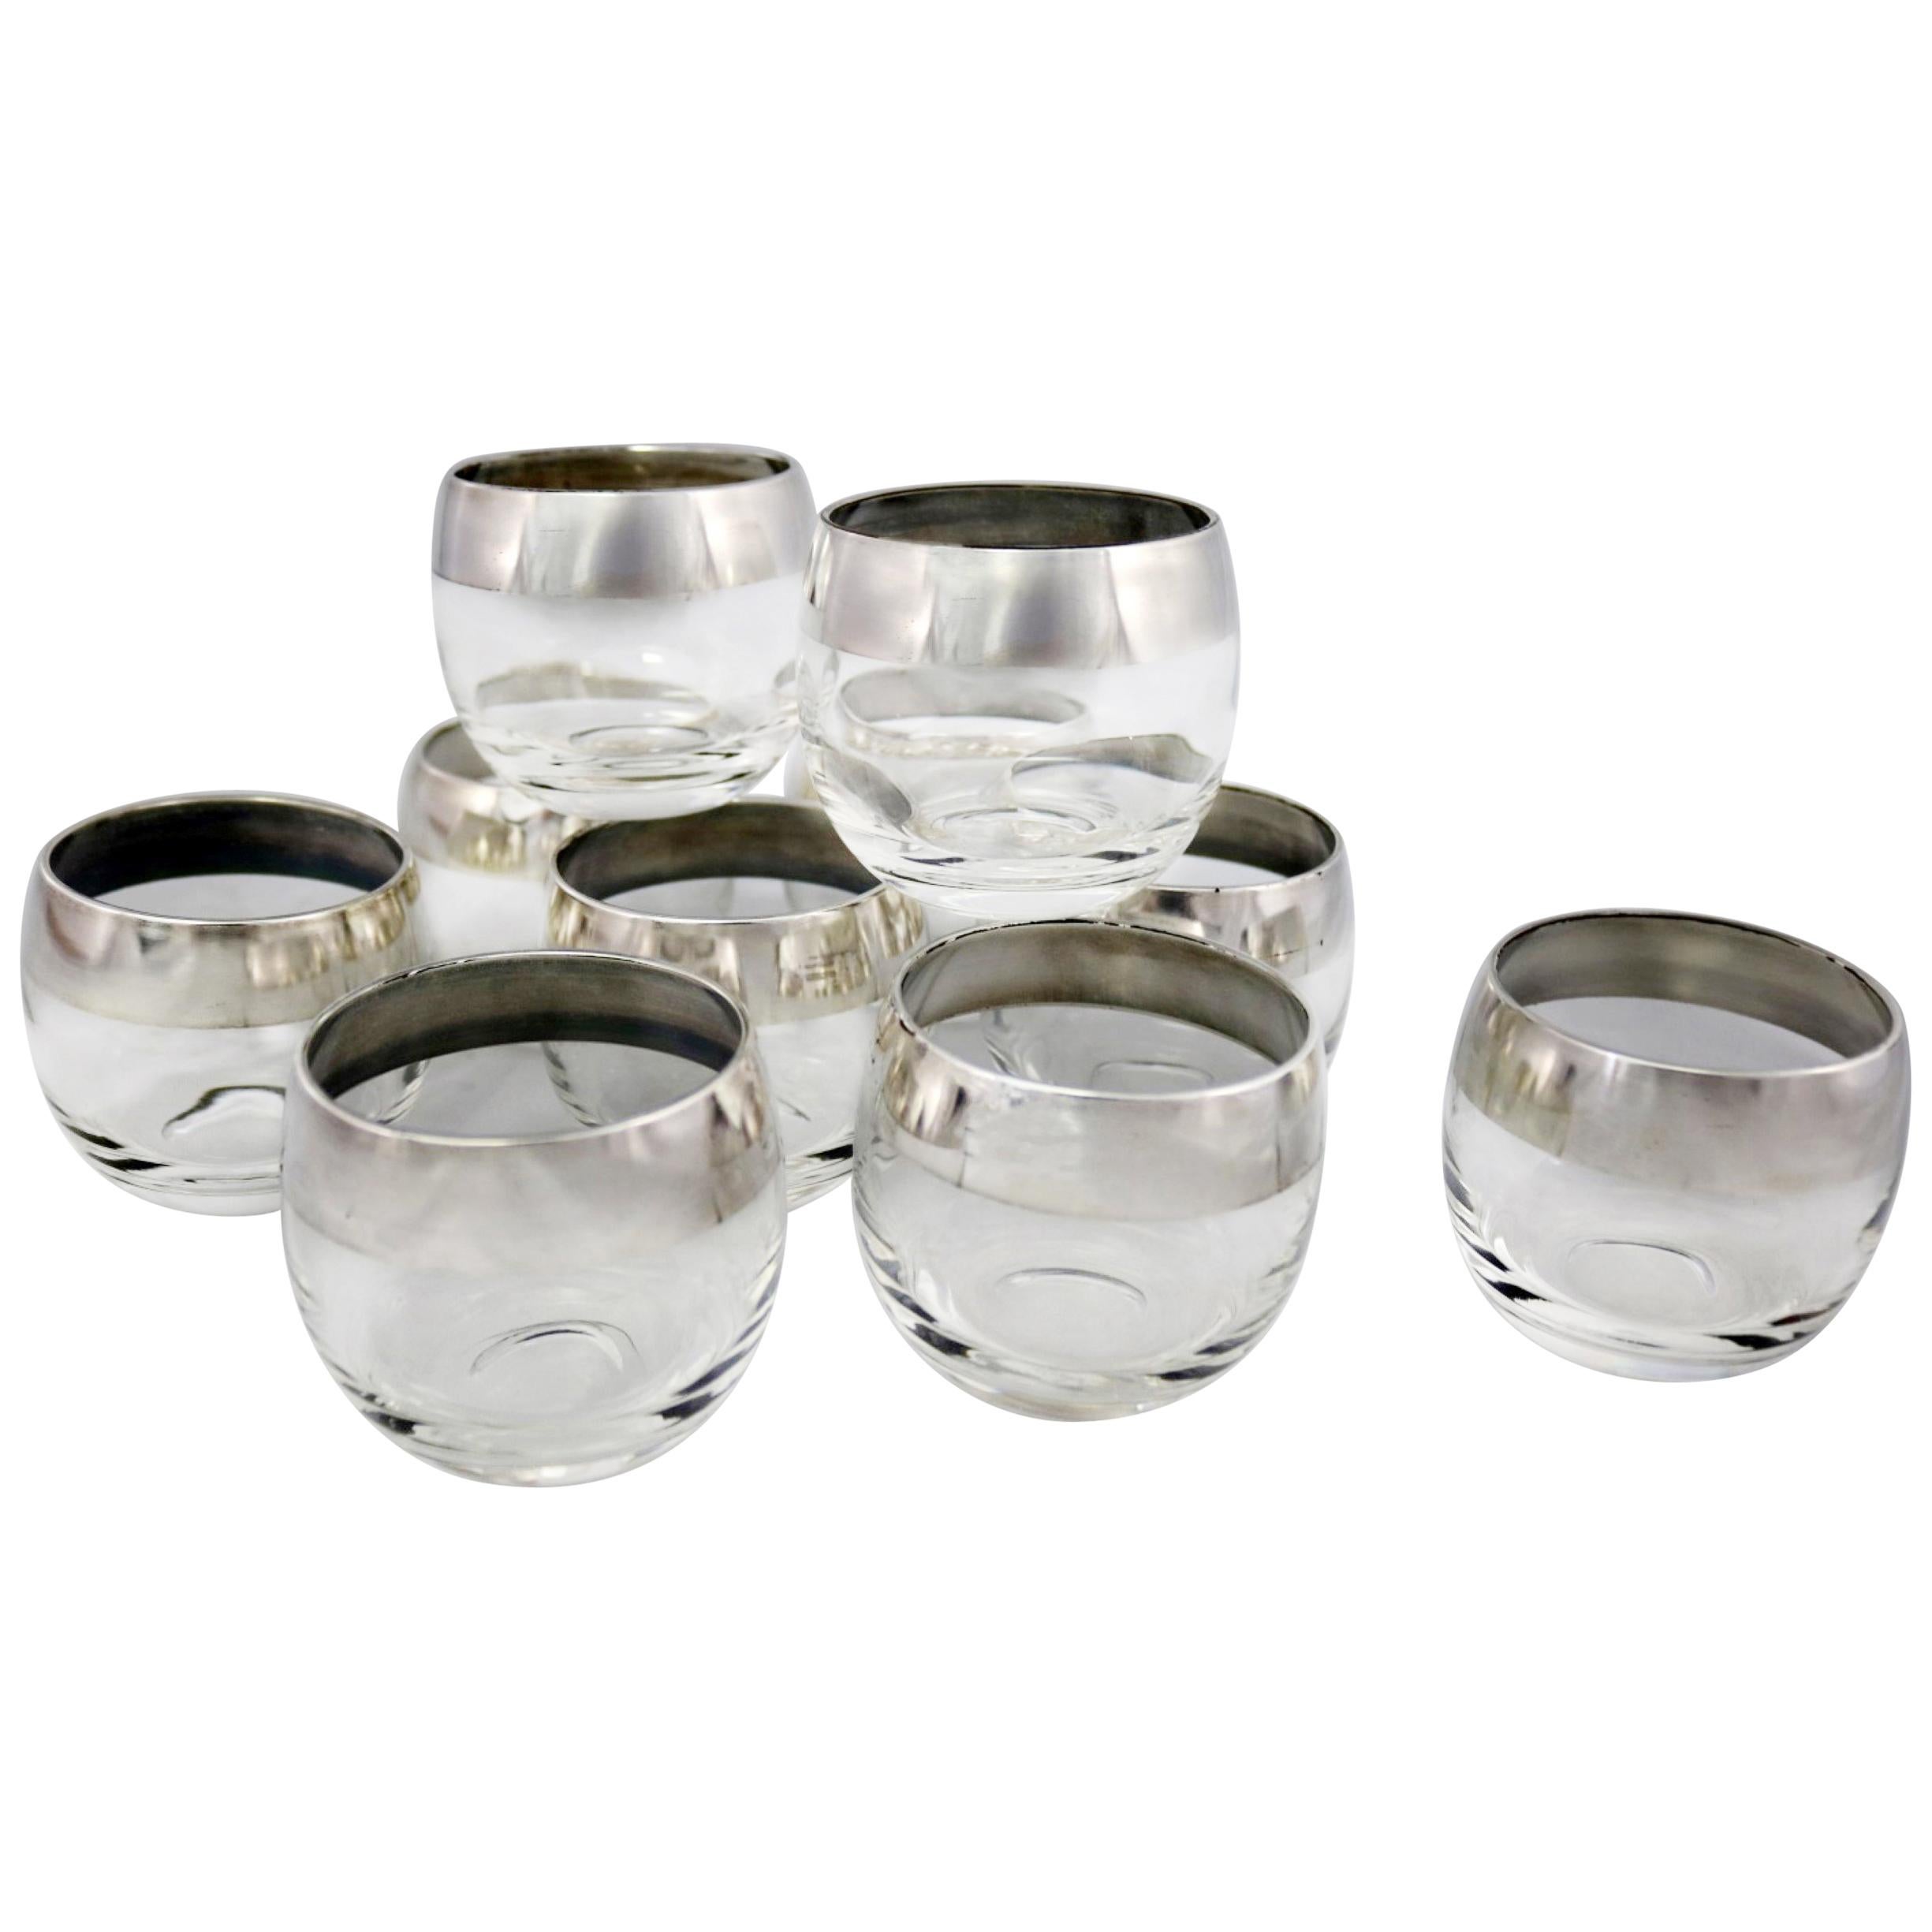 Sterling Silver Rimmed Roly Poly Cocktail Glasses Attributed to Dorothy Thorpe